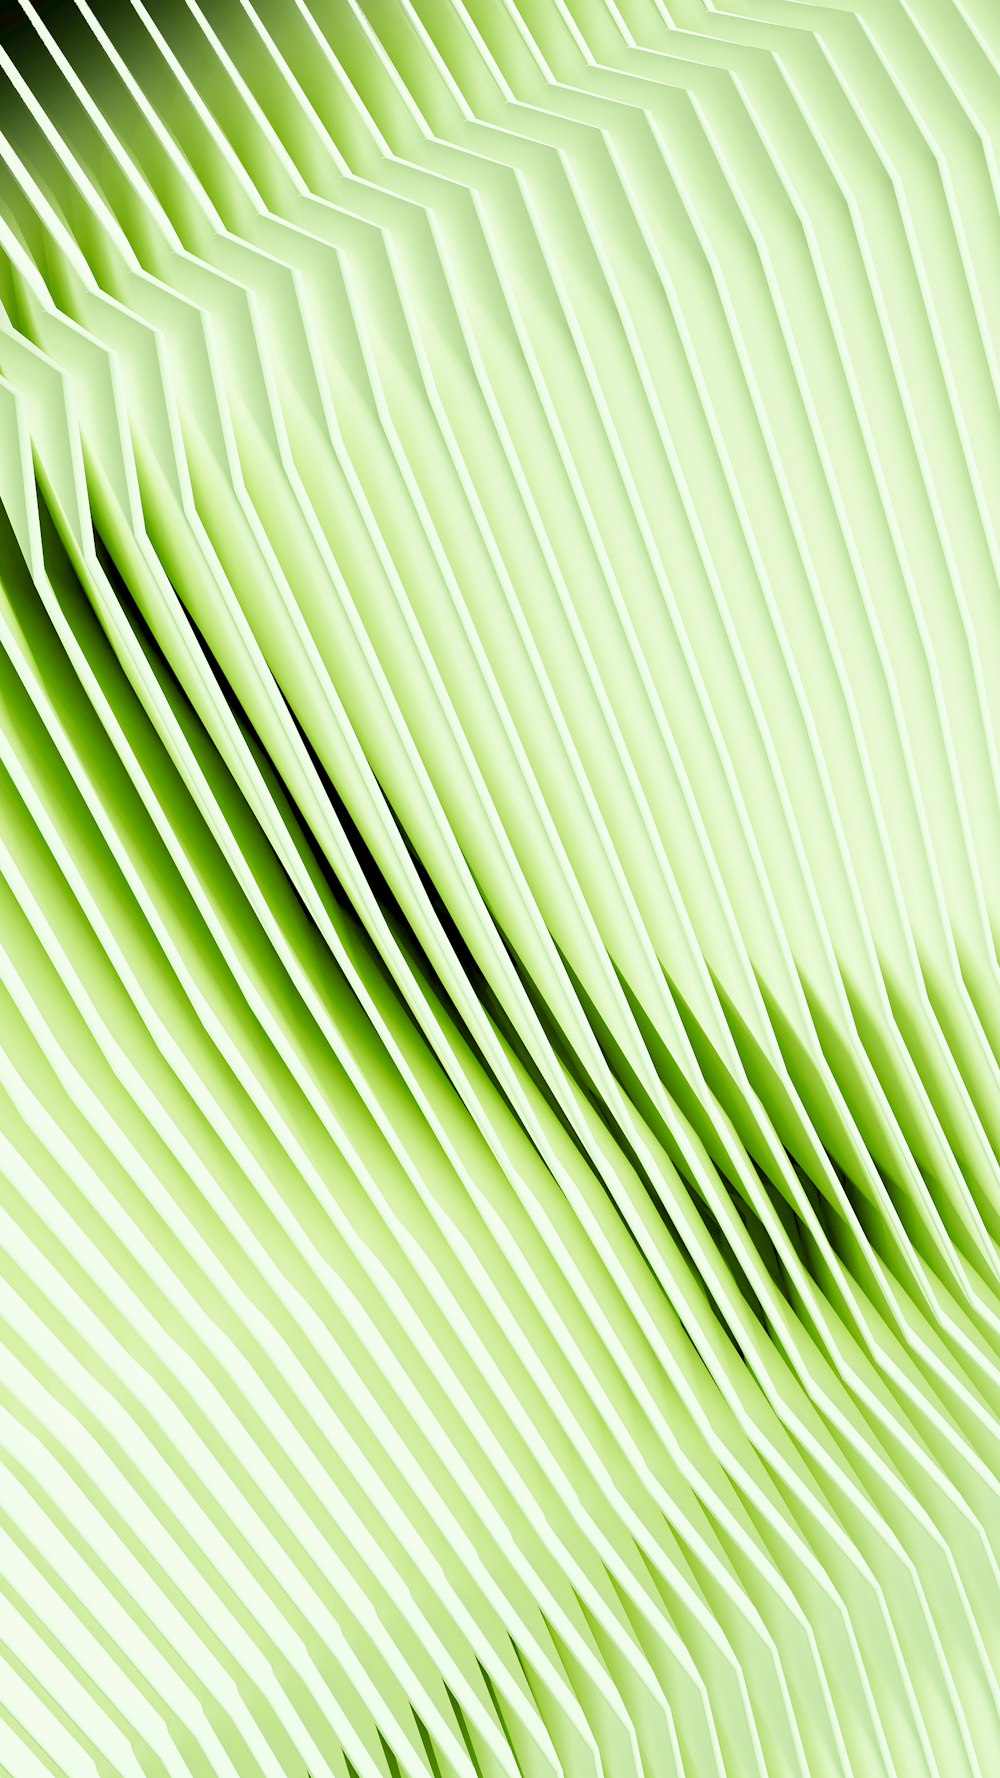 a green abstract background with wavy lines